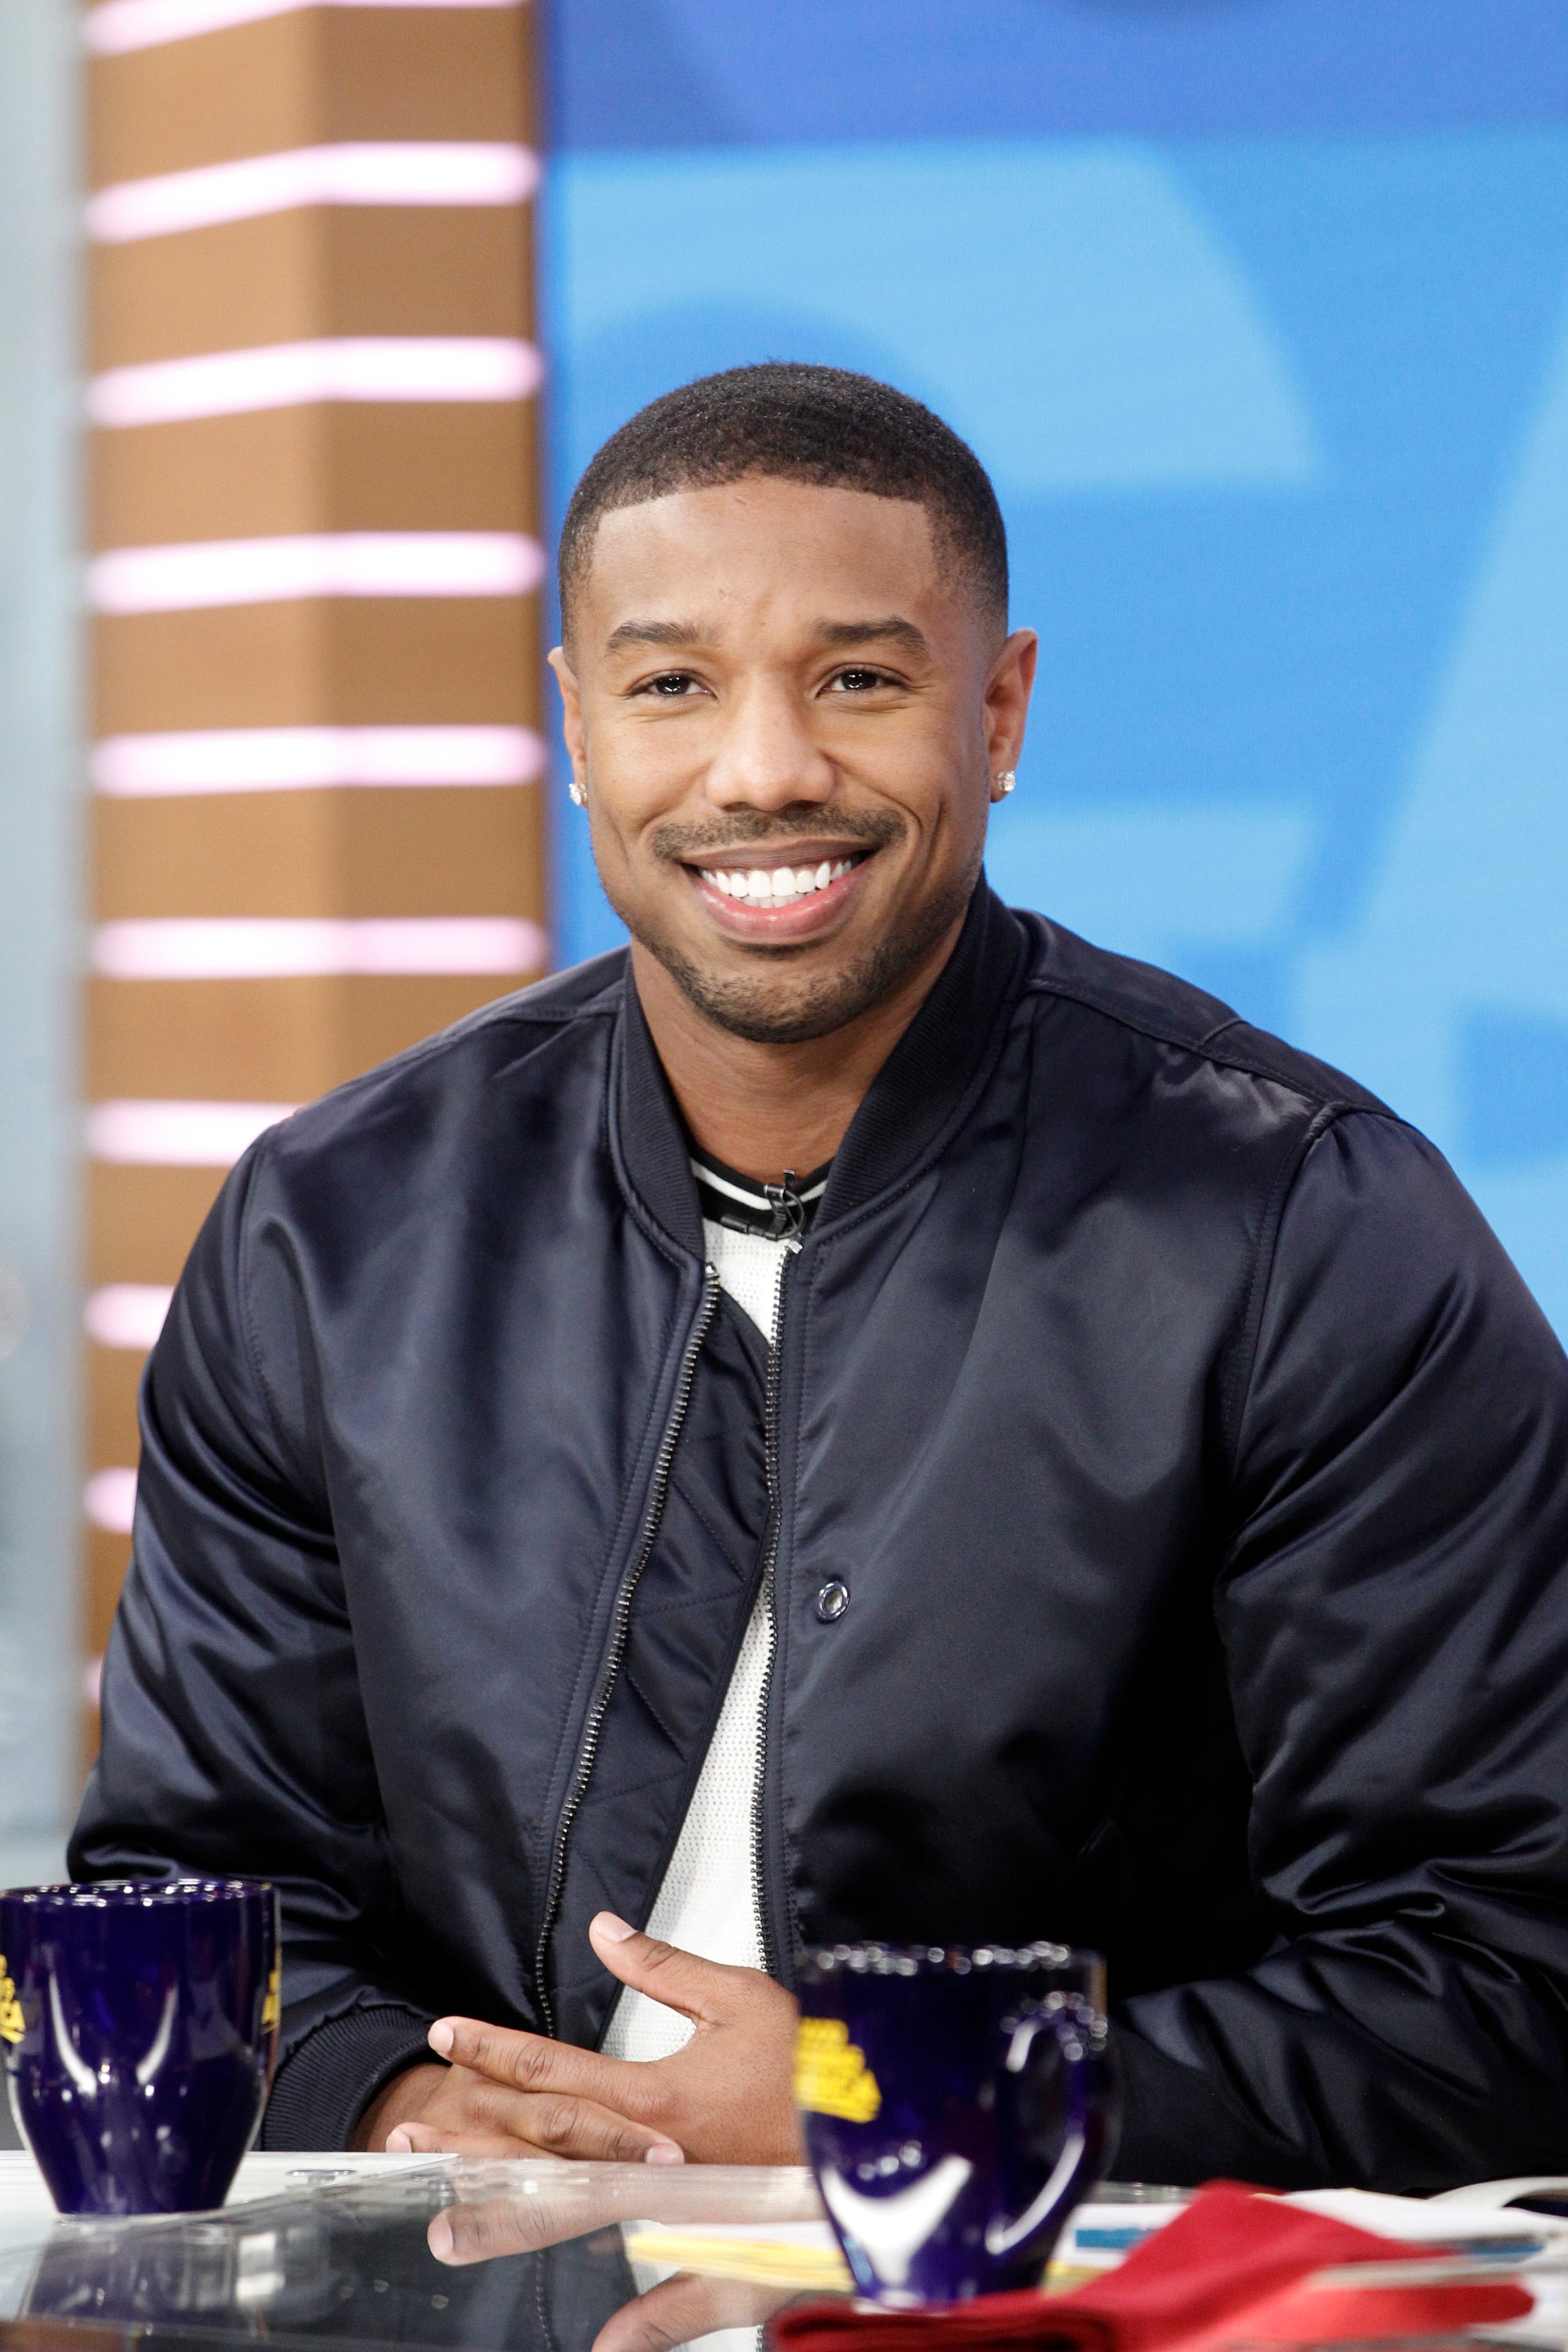 Michael B. Jordan Offered To Replace A Fan's Retainer After She Got Too Excited Watching 'Black Panther'
